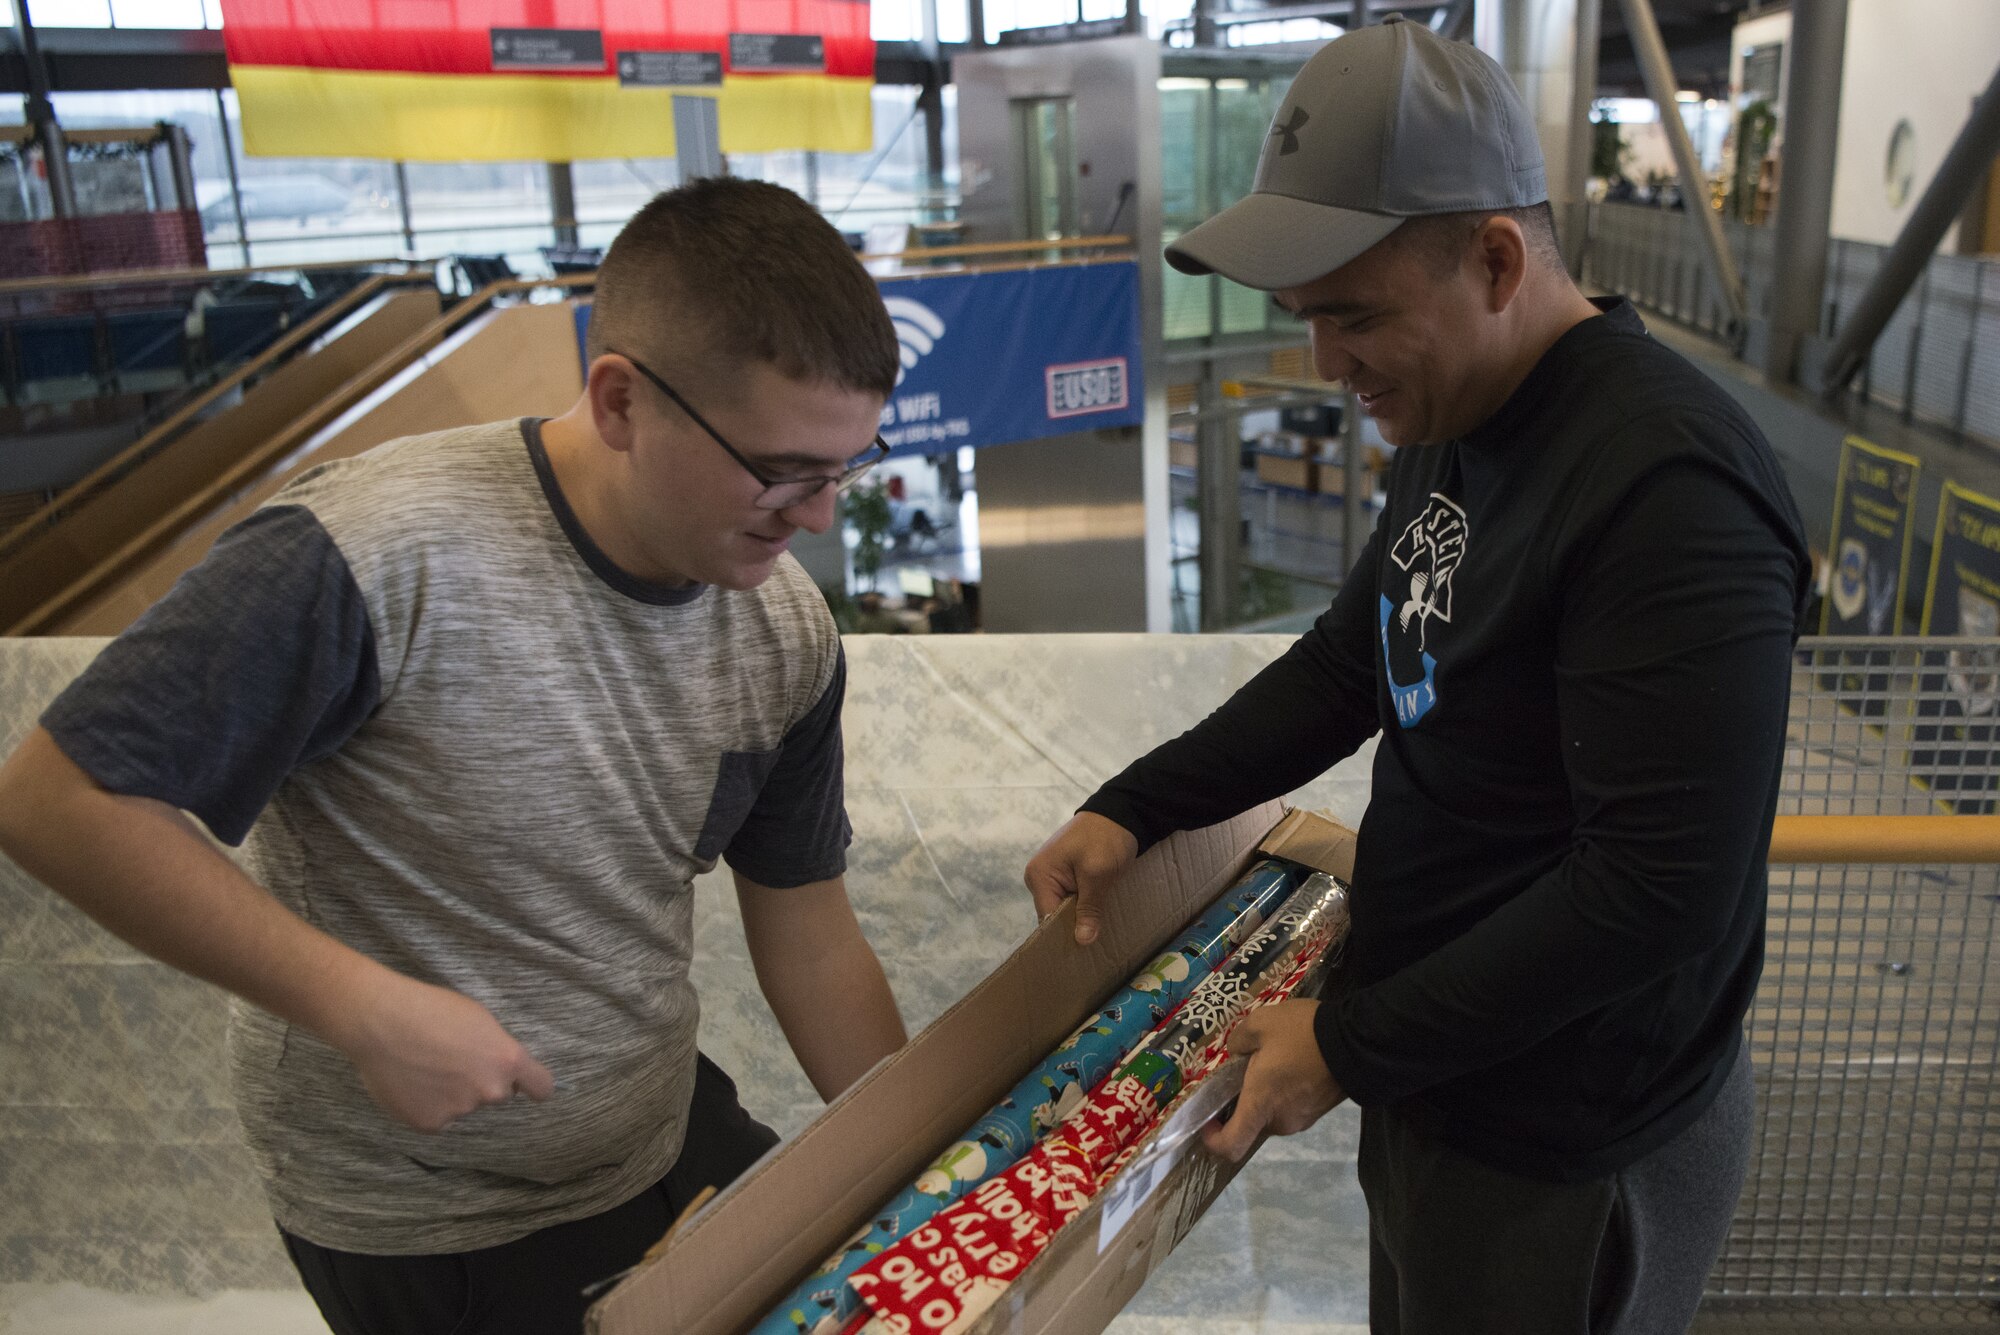 U.S. Air Force Airman 1st Class Michael Tart, left, and Staff Sgt. Anthony Marquez, right, 450th Intelligence Squadron Airmen, decorate the passenger terminal on Ramstein Air Base, Germany, Dec. 7, 2018. The 450th IS hosted a volunteer day as a way for the squadron to give back to non-profit organizations around Ramstein Air Base. (U.S. Air Force Photo by Airman 1st Class Noah Coger)